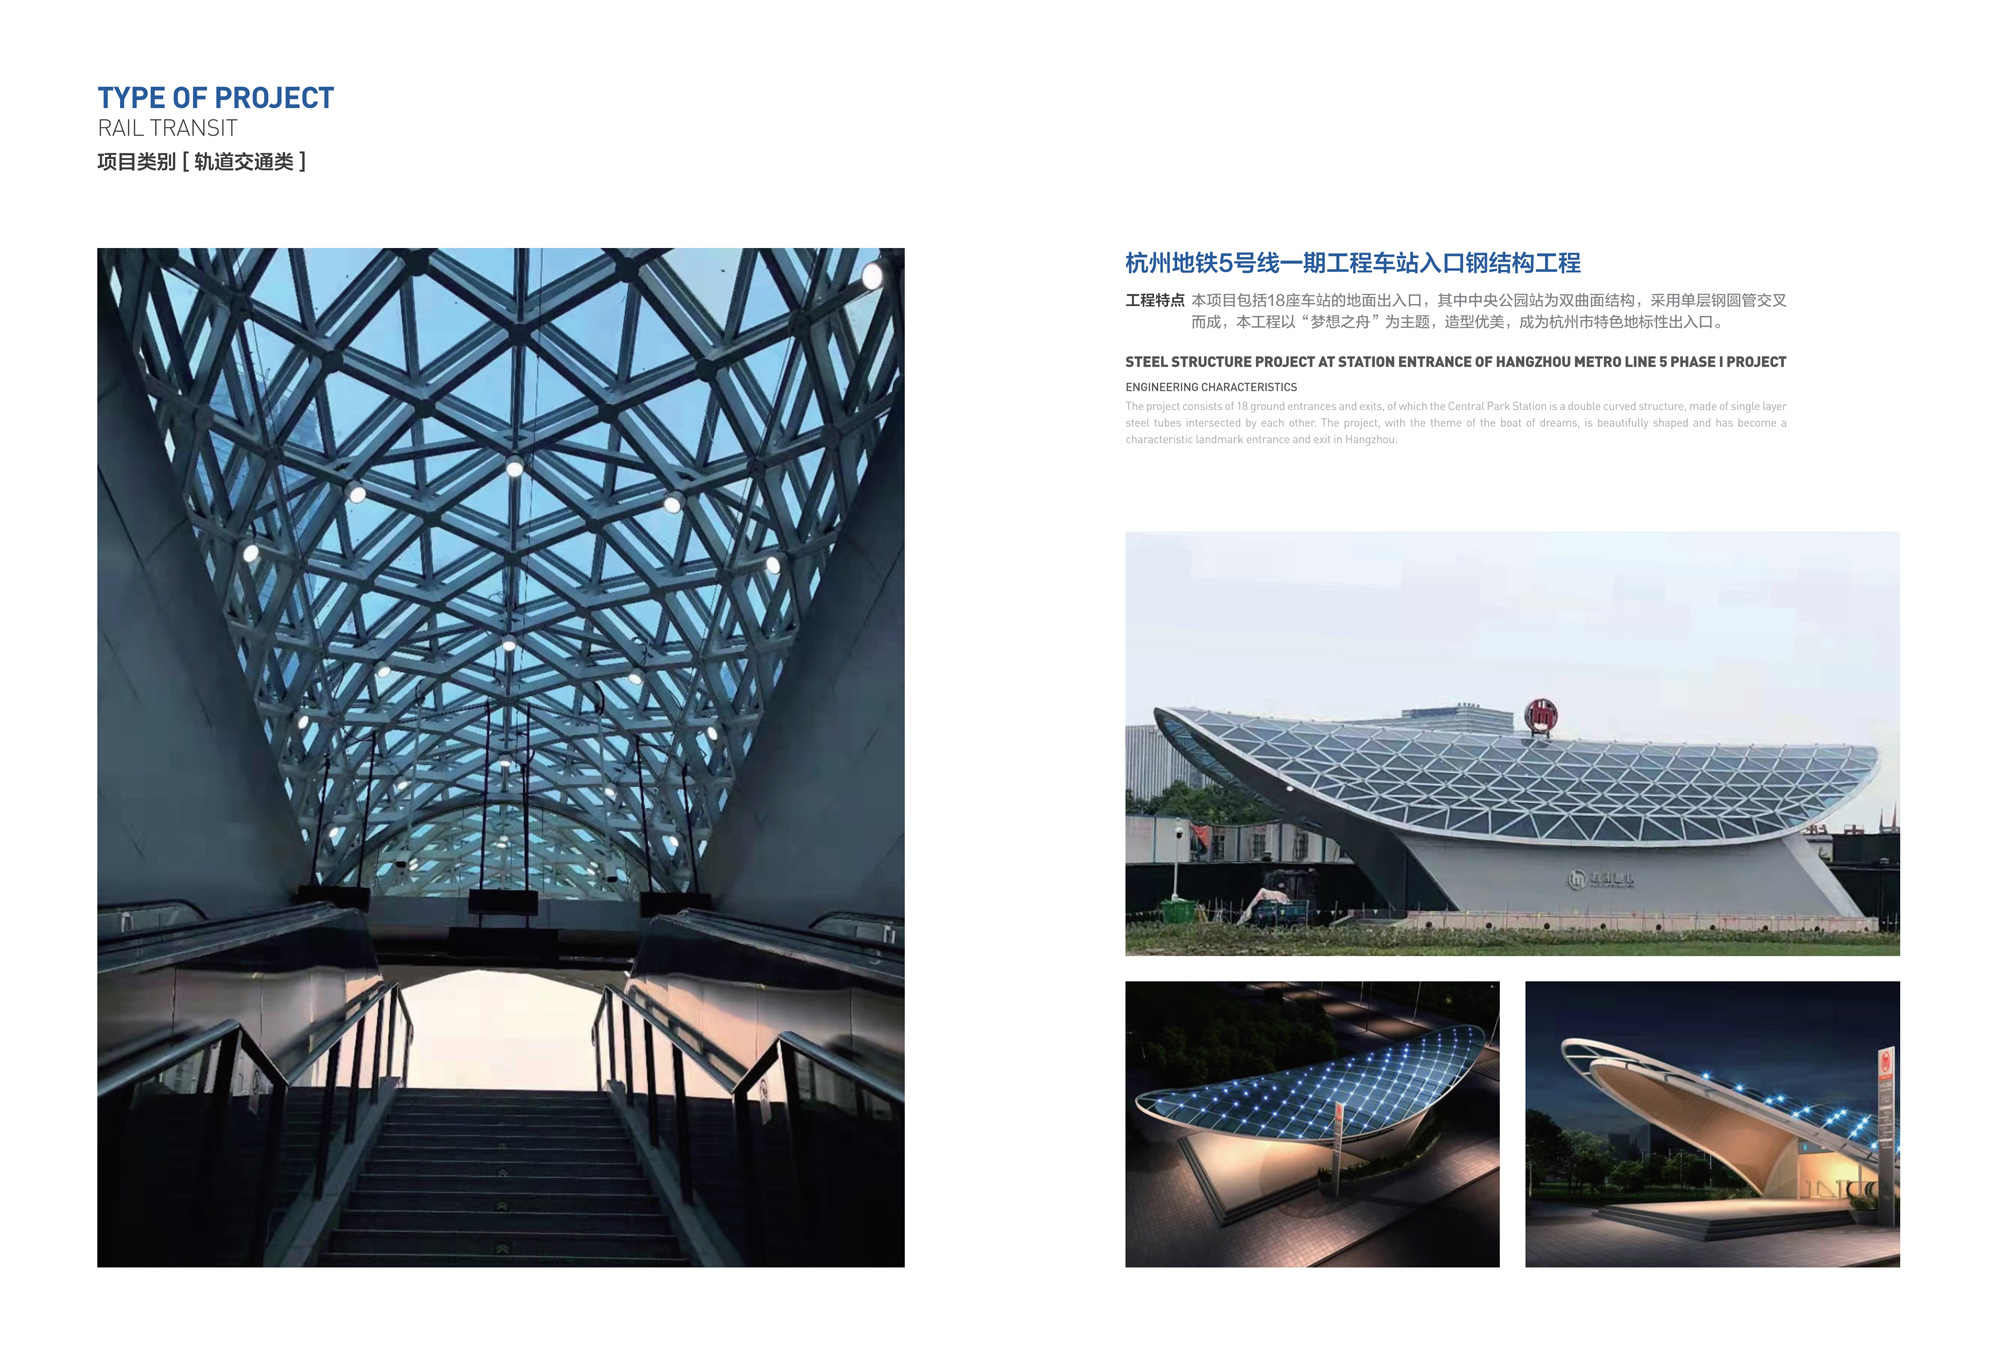 Hangzhou Metro Line 5 Phase I Project Station Entrance Steel Structural engineering